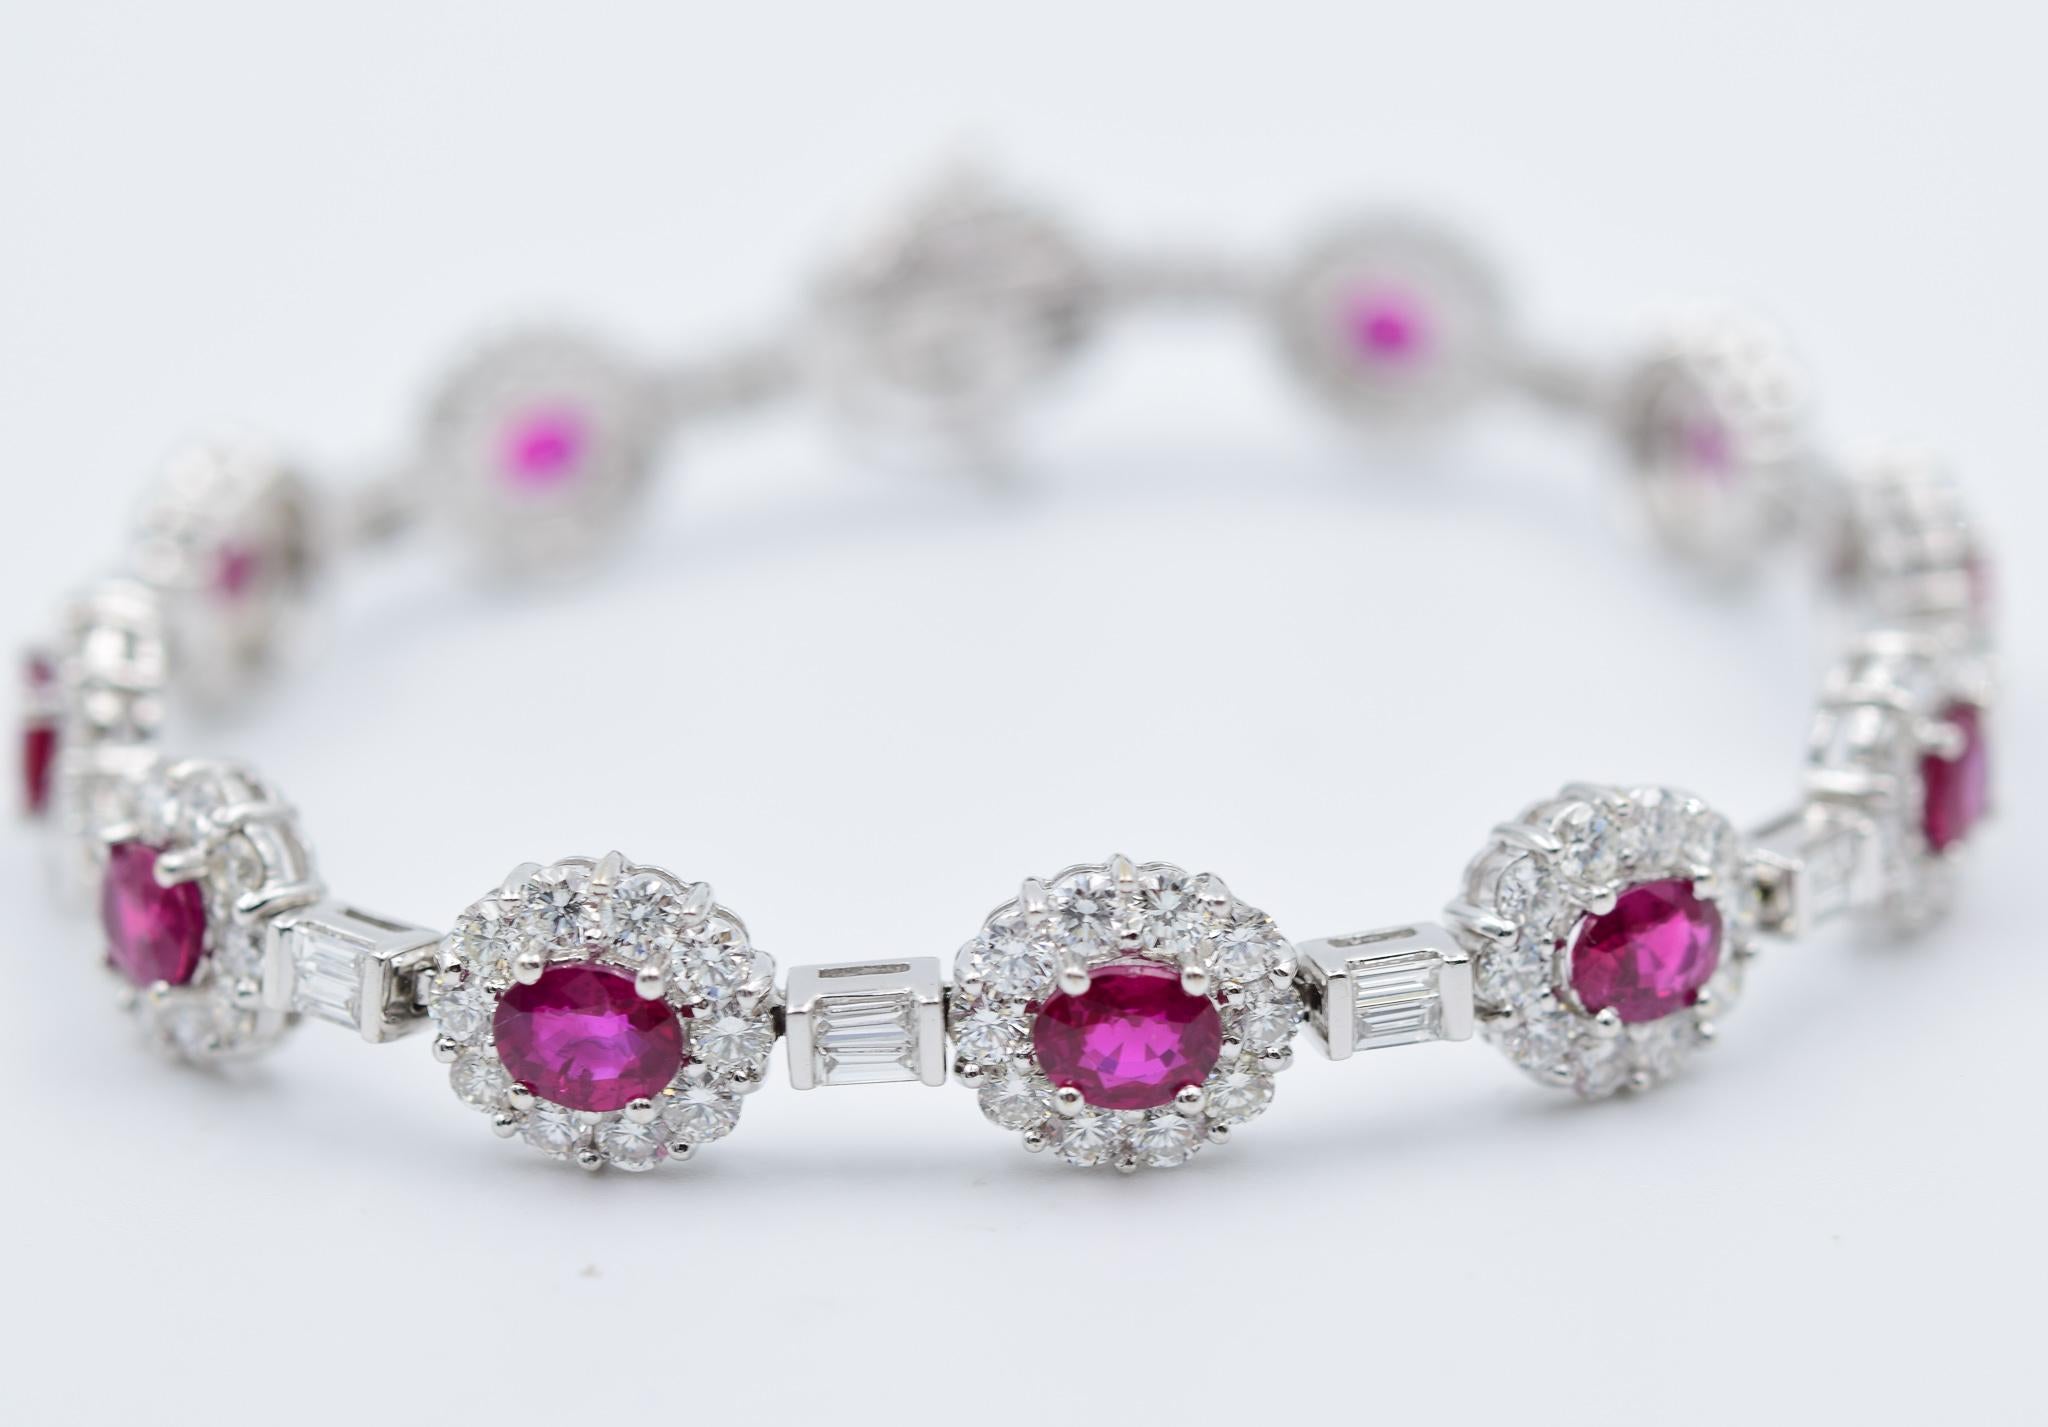 Oval Cut Ruby and Diamond Luxurious Platinum Bracelet with 3.60 Carat of Rubies